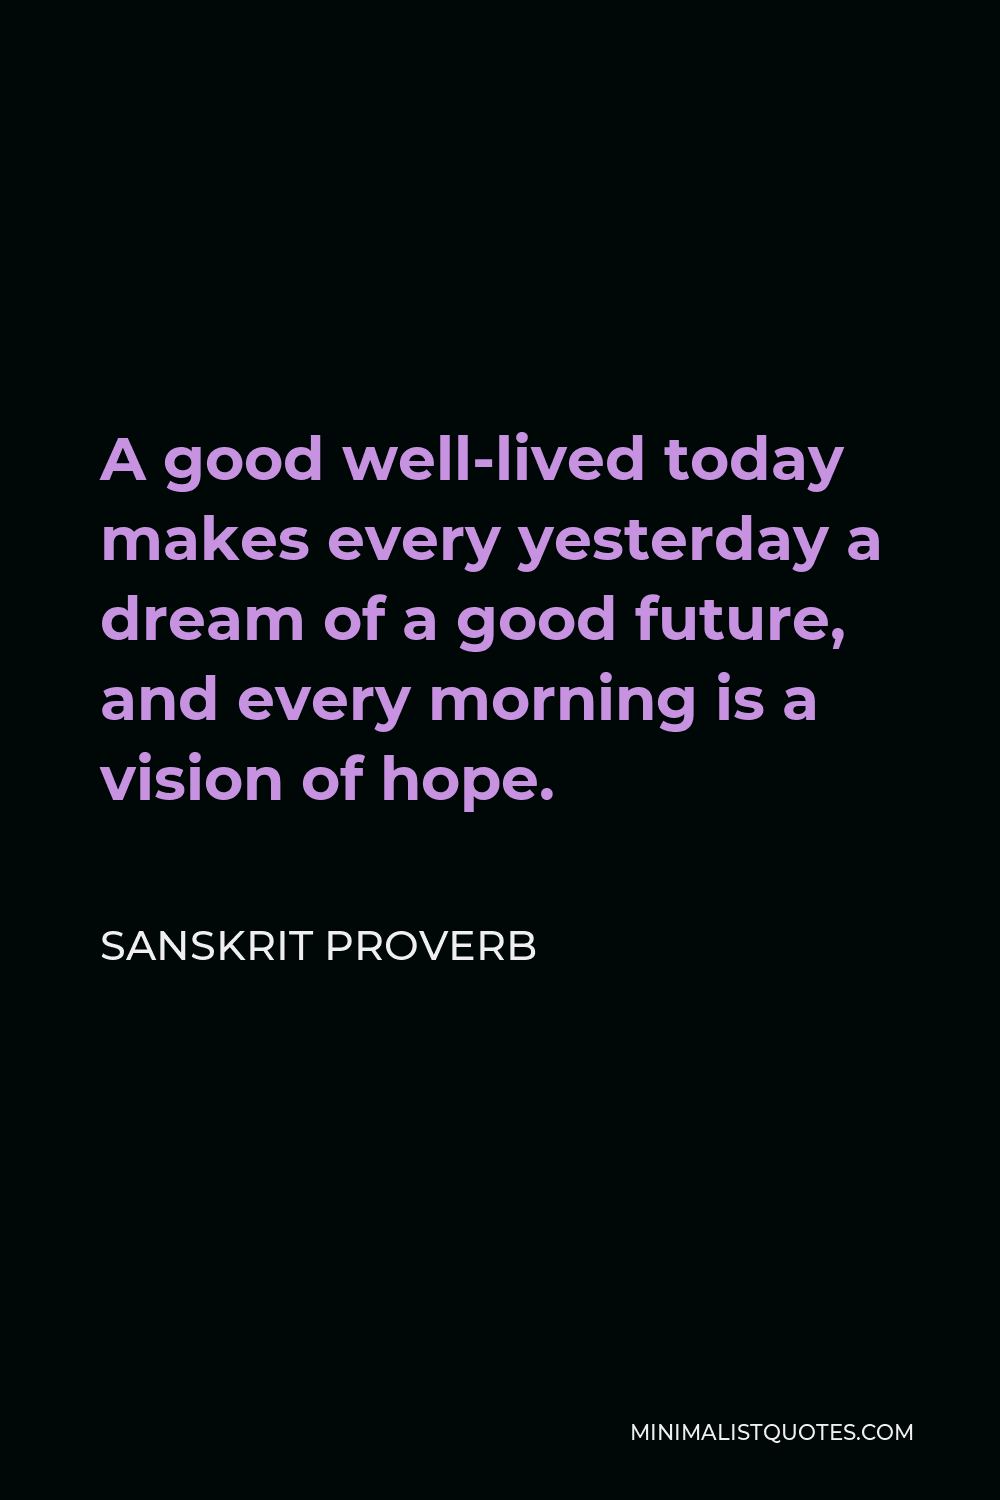 Sanskrit Proverb Quote - A good well-lived today makes every yesterday a dream of a good future, and every morning is a vision of hope.